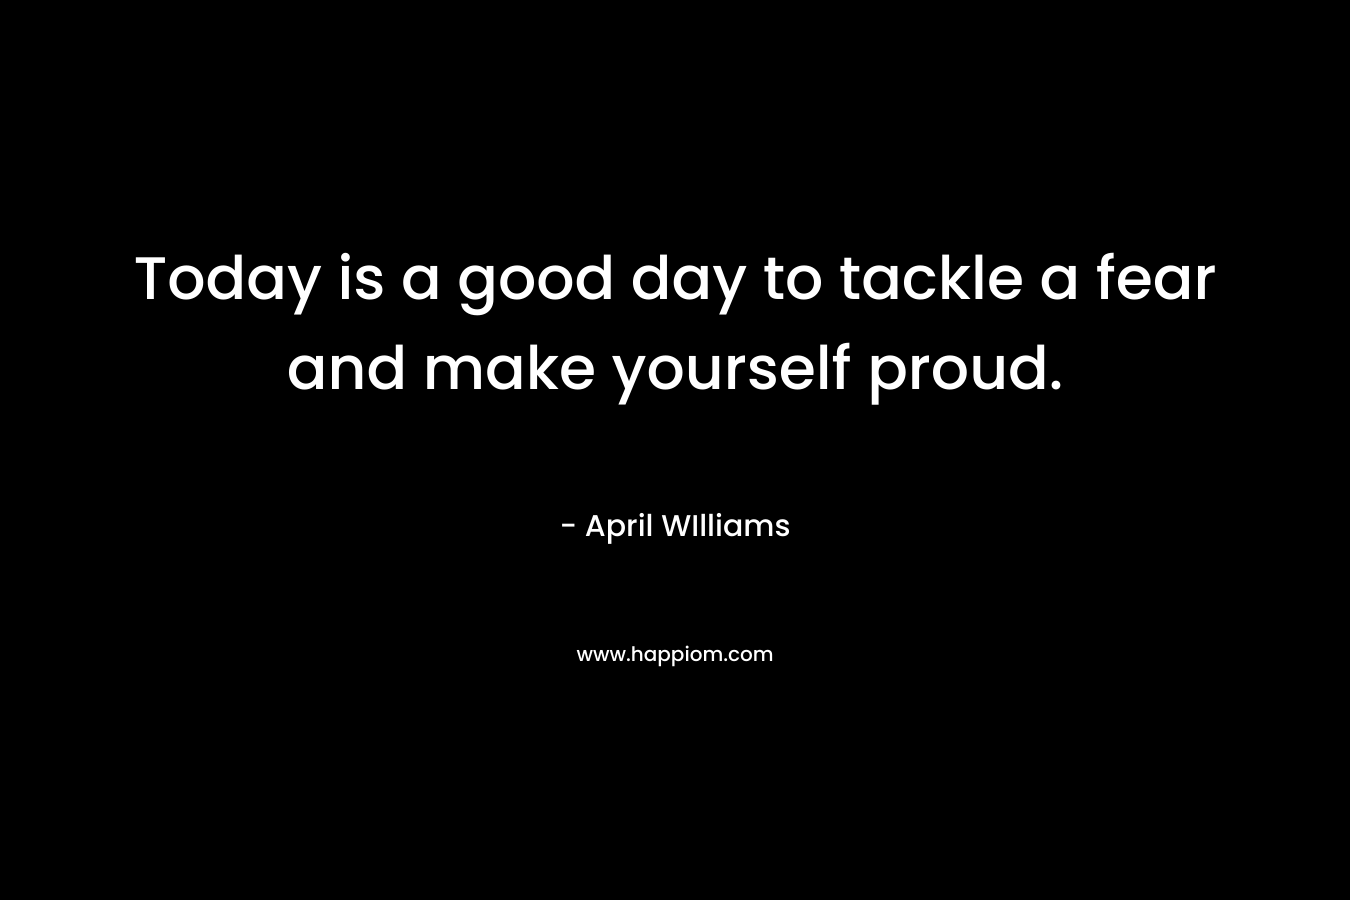 Today is a good day to tackle a fear and make yourself proud.